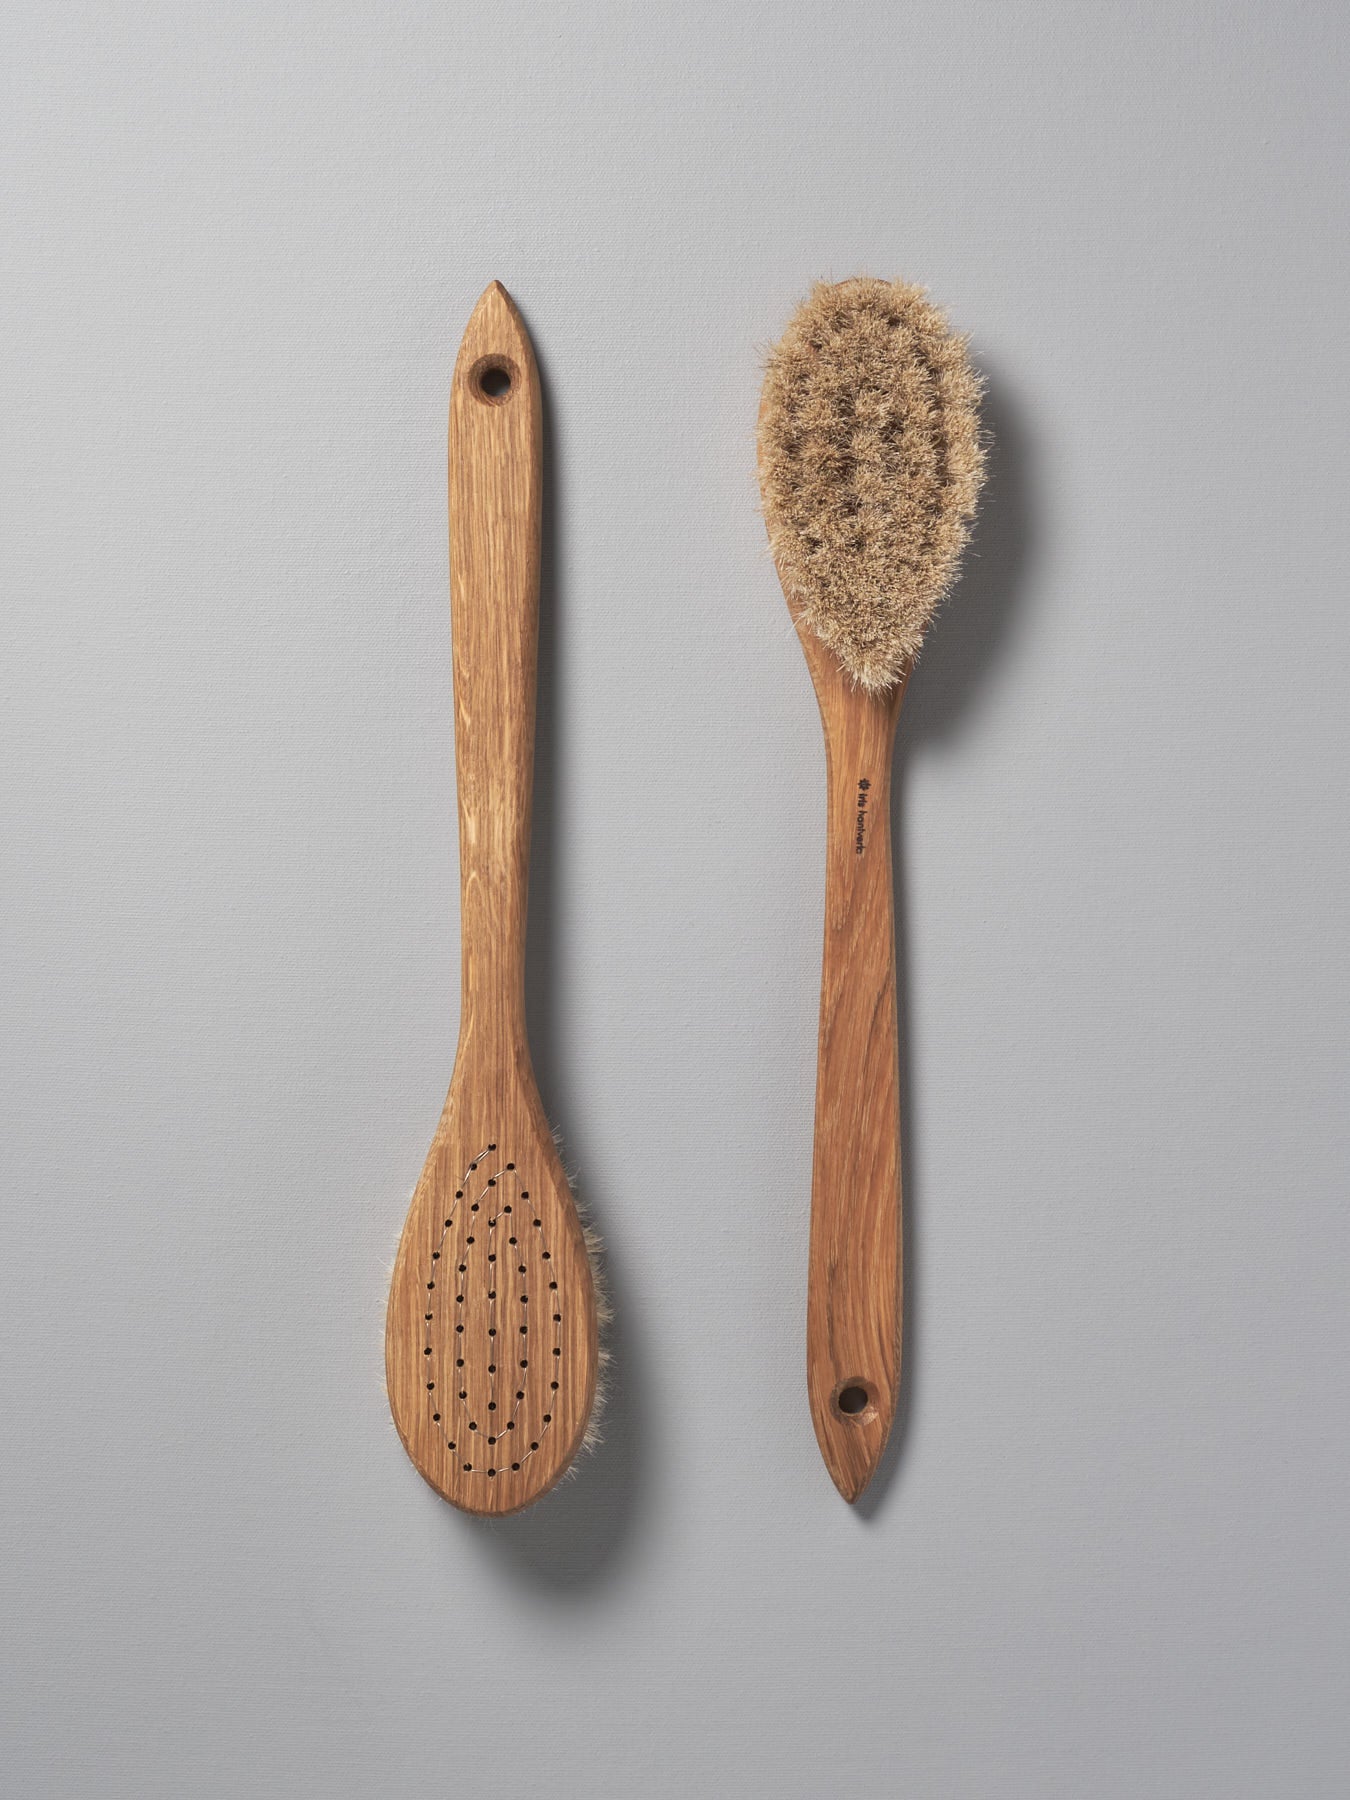 Two Iris Hantverk Body Brushes – Oval Head next to each other on a grey background.